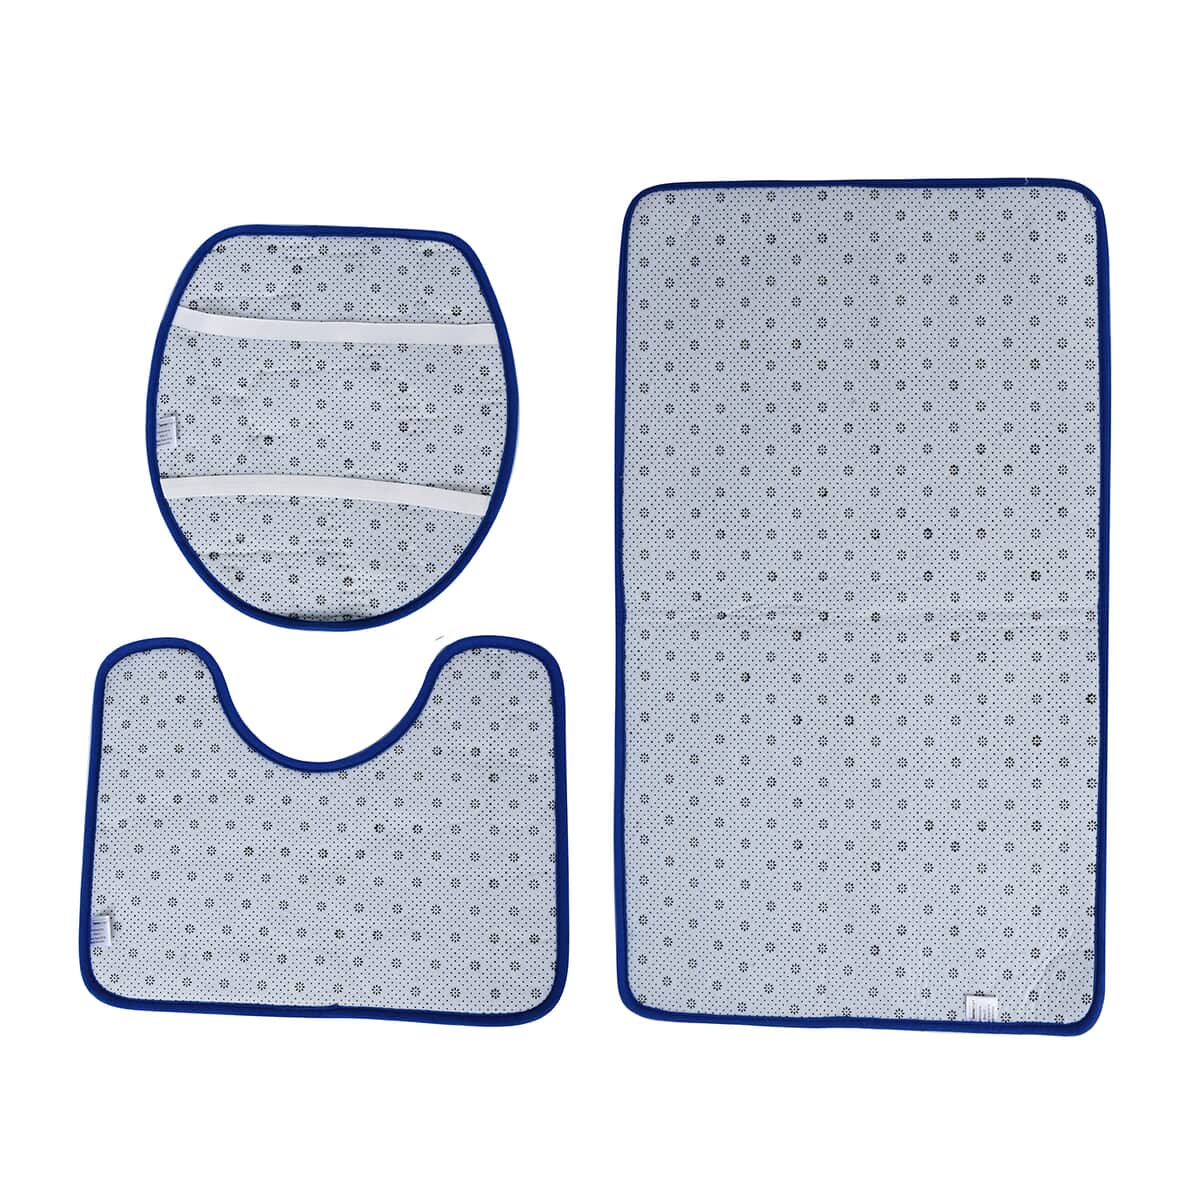 Set of 3 Piece - Blue Polyester Door Mat (19x31"), Toilet Mat (19x15") and Toilet Cover (15x16.5") image number 5